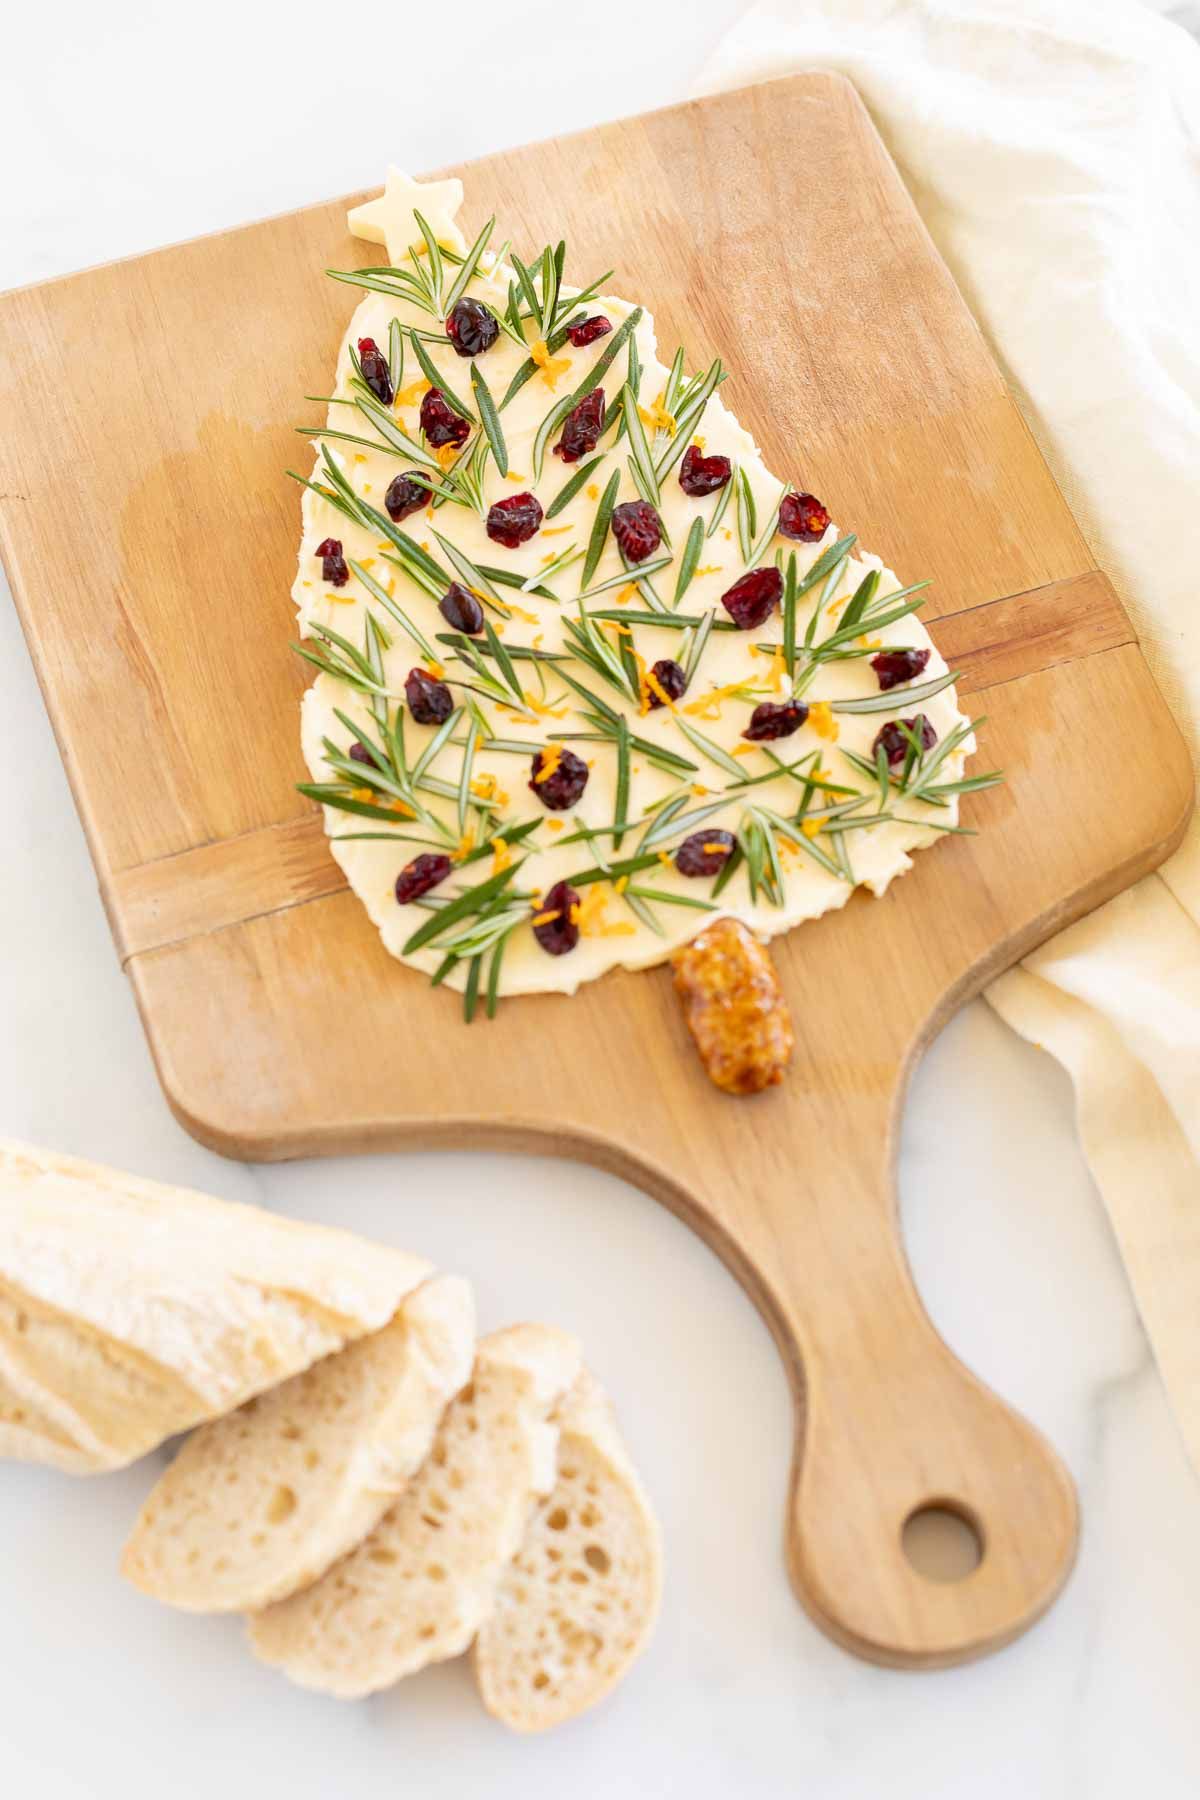 A Christmas butter board, placed on a wooden charcuterie board and shaped into a Christmas tree.